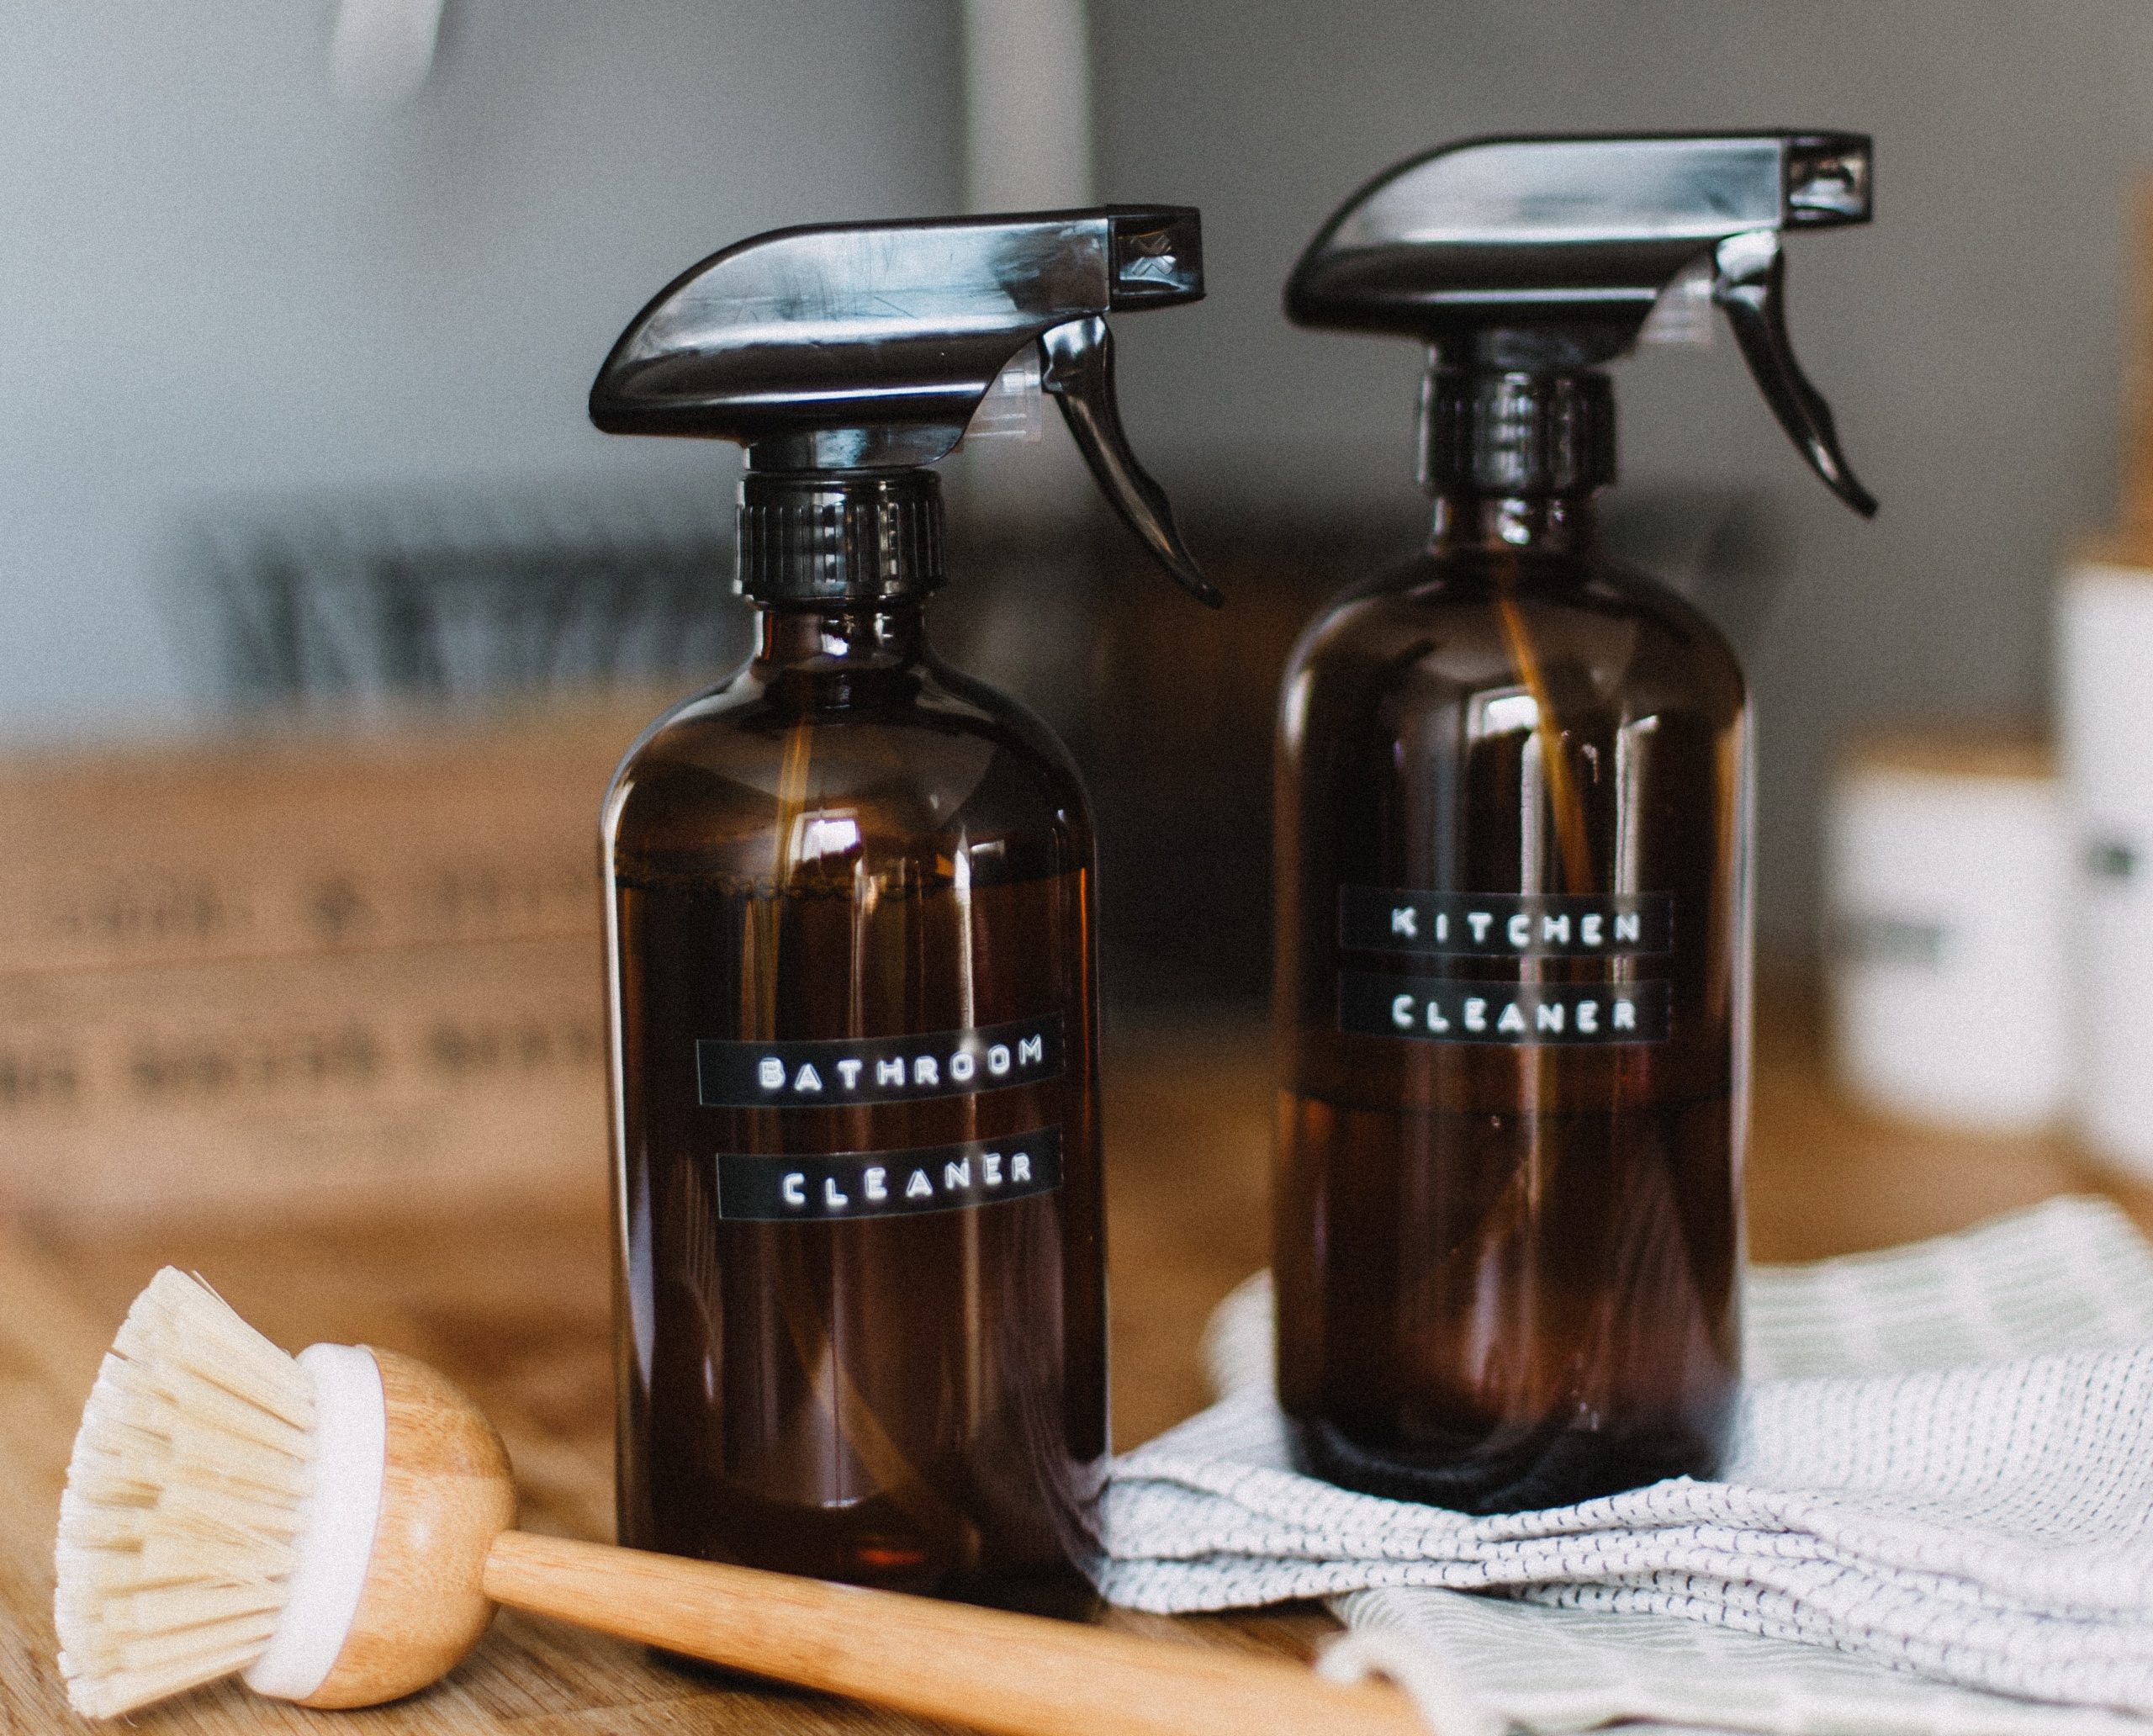 eco-friendly homemade kitchen and bathroom cleaners